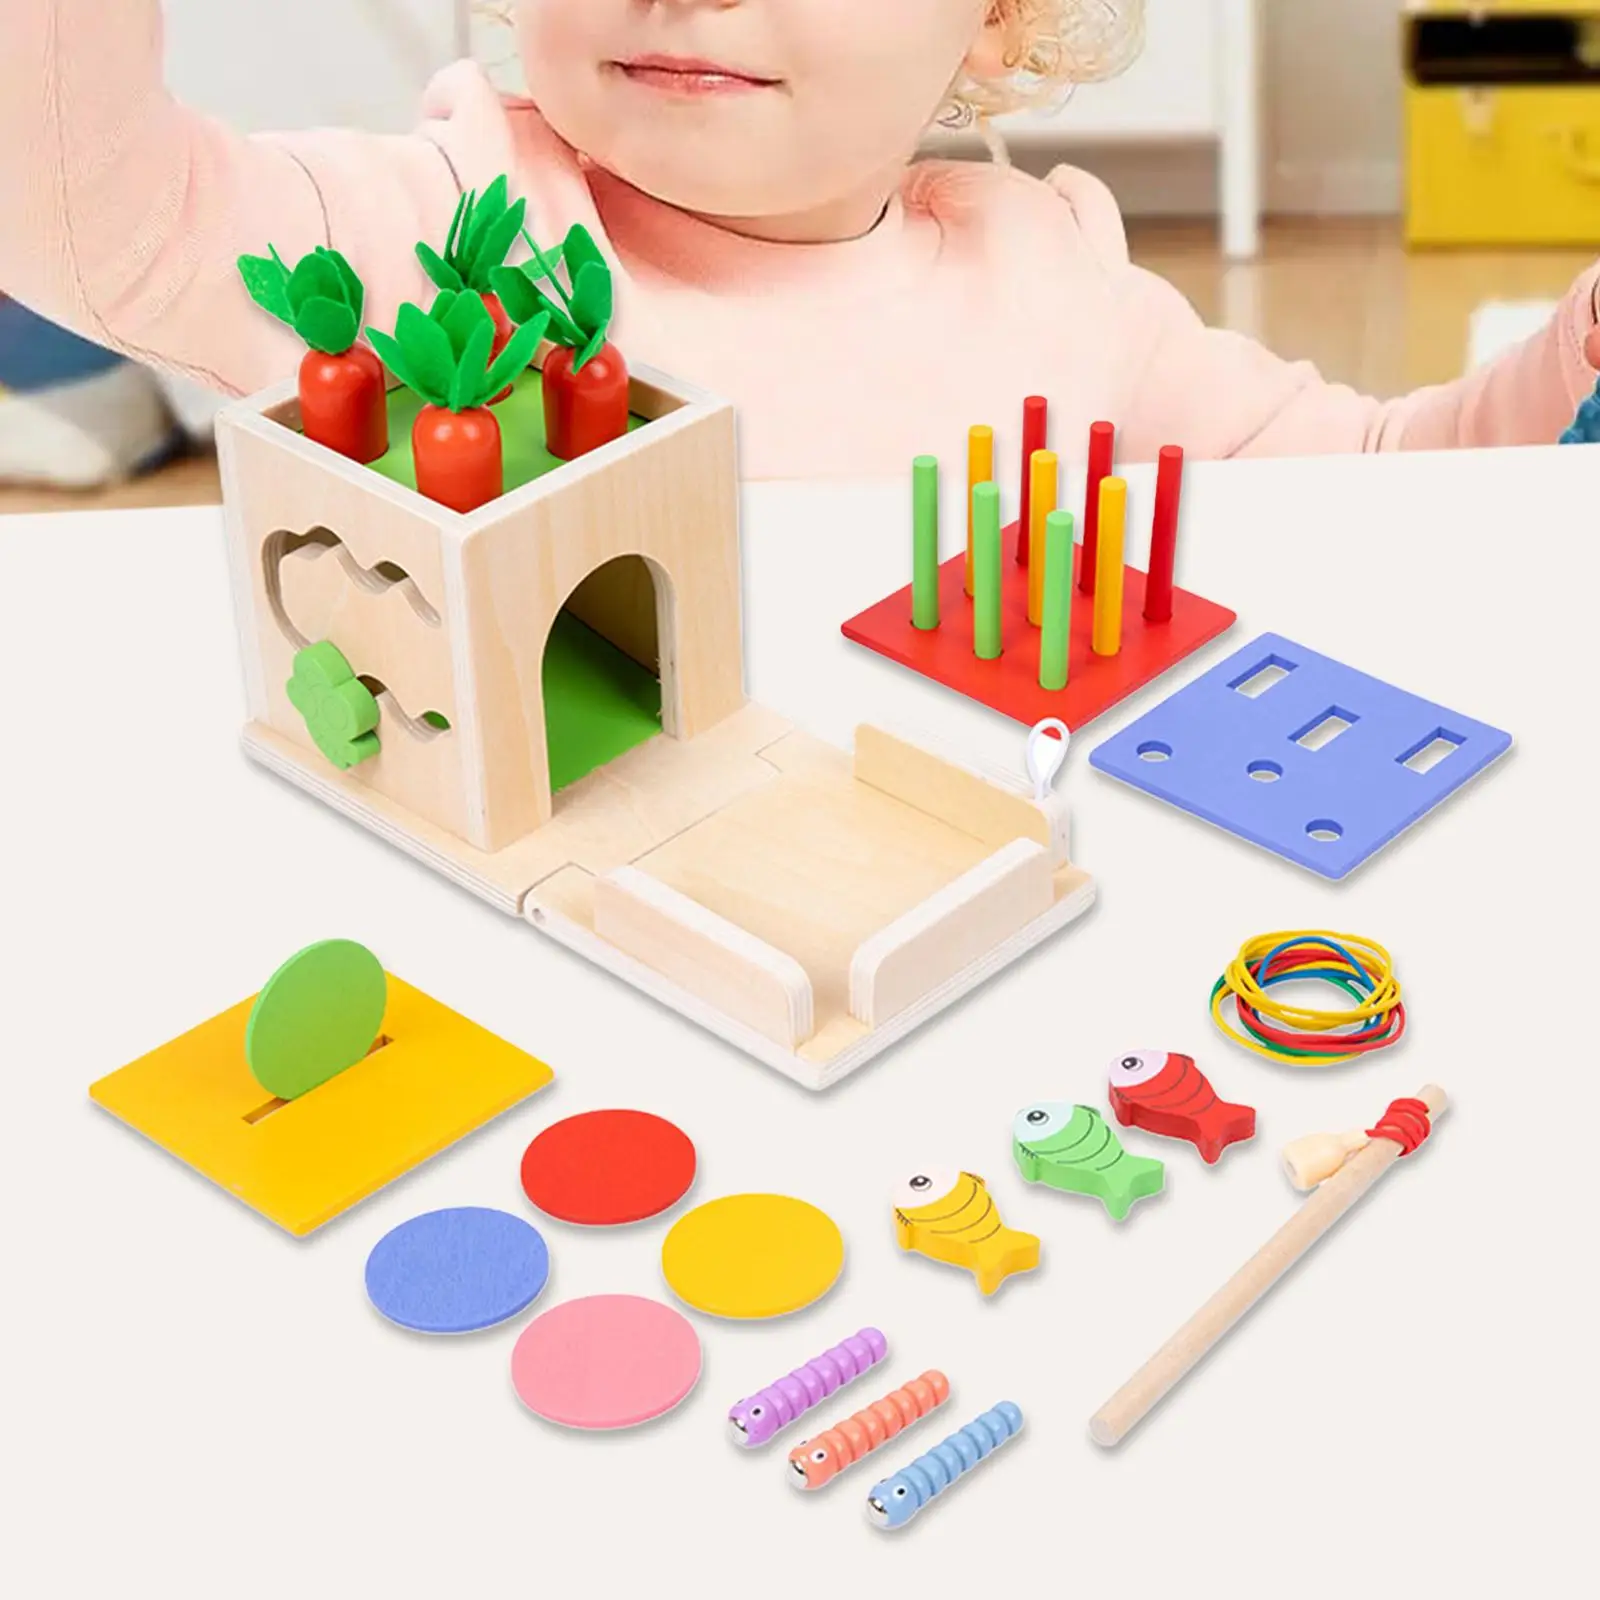 Montessori Toddler Play Kit Wooden Toy Box Set Montessori Toddler Educational Learning Toys Educational Toys for 1 2 3 Year Old